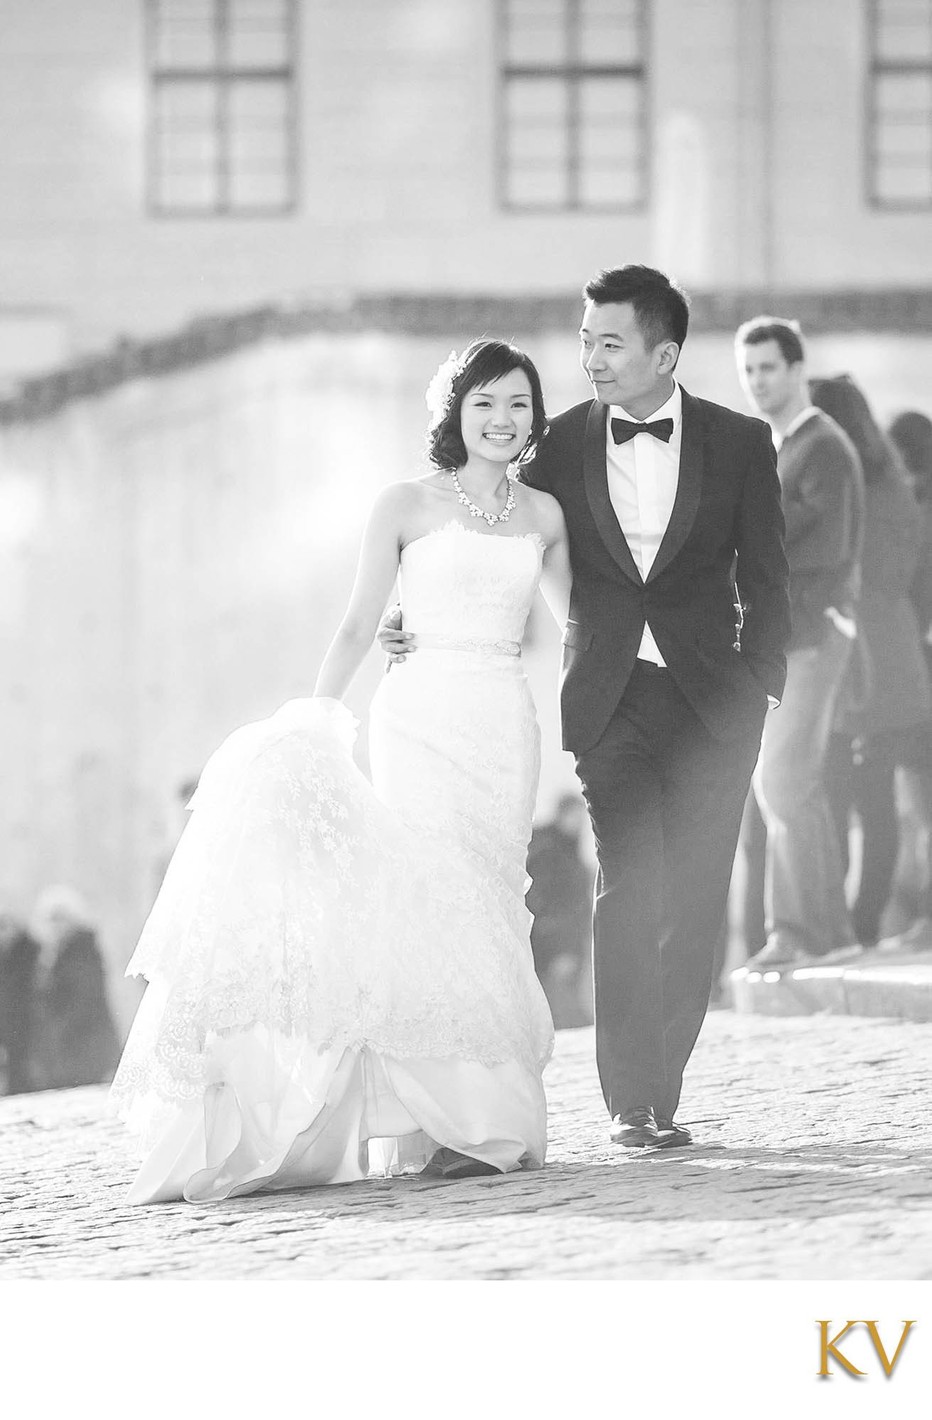 The happiest newlyweds in Prague pictured in b&w